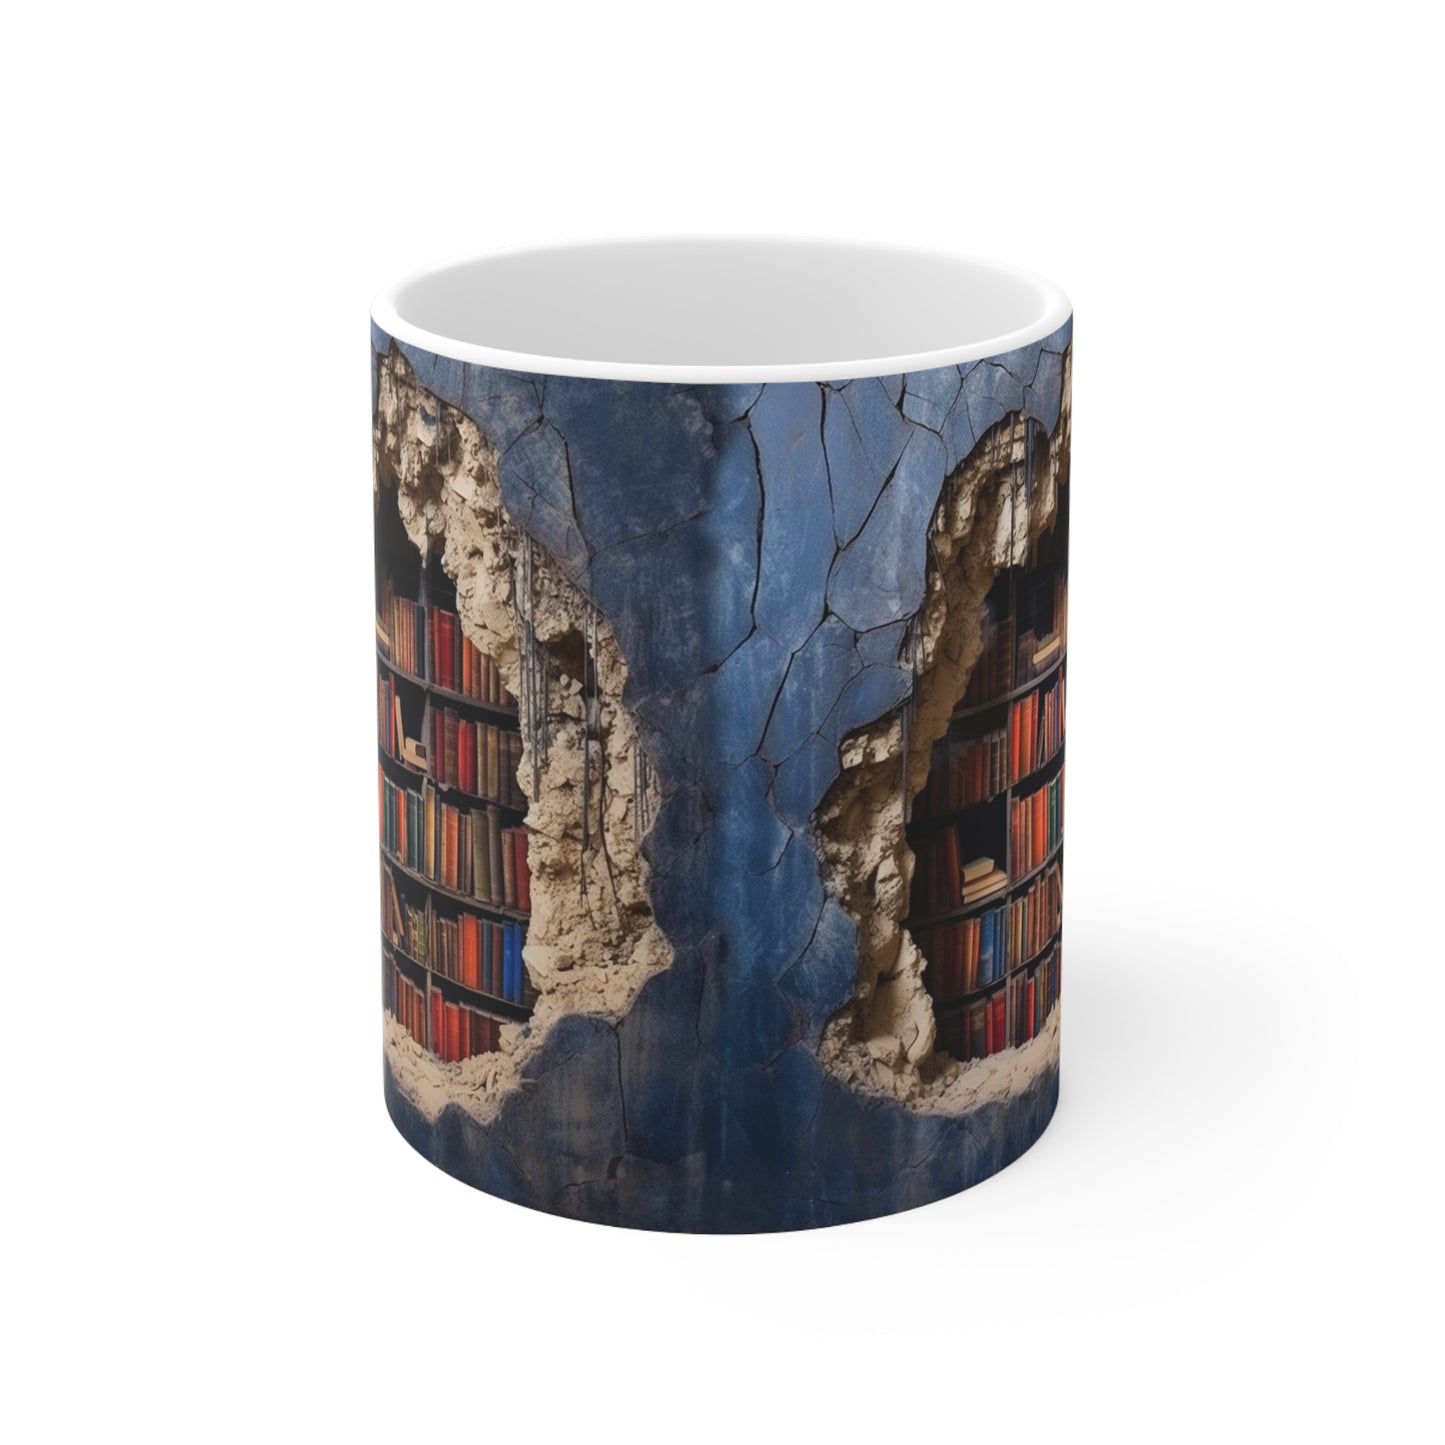 AMAZING LIBRARY COLLECTION 3D MUG #1 - Perfect for Book Lovers - MUGSCITY - Free Shipping